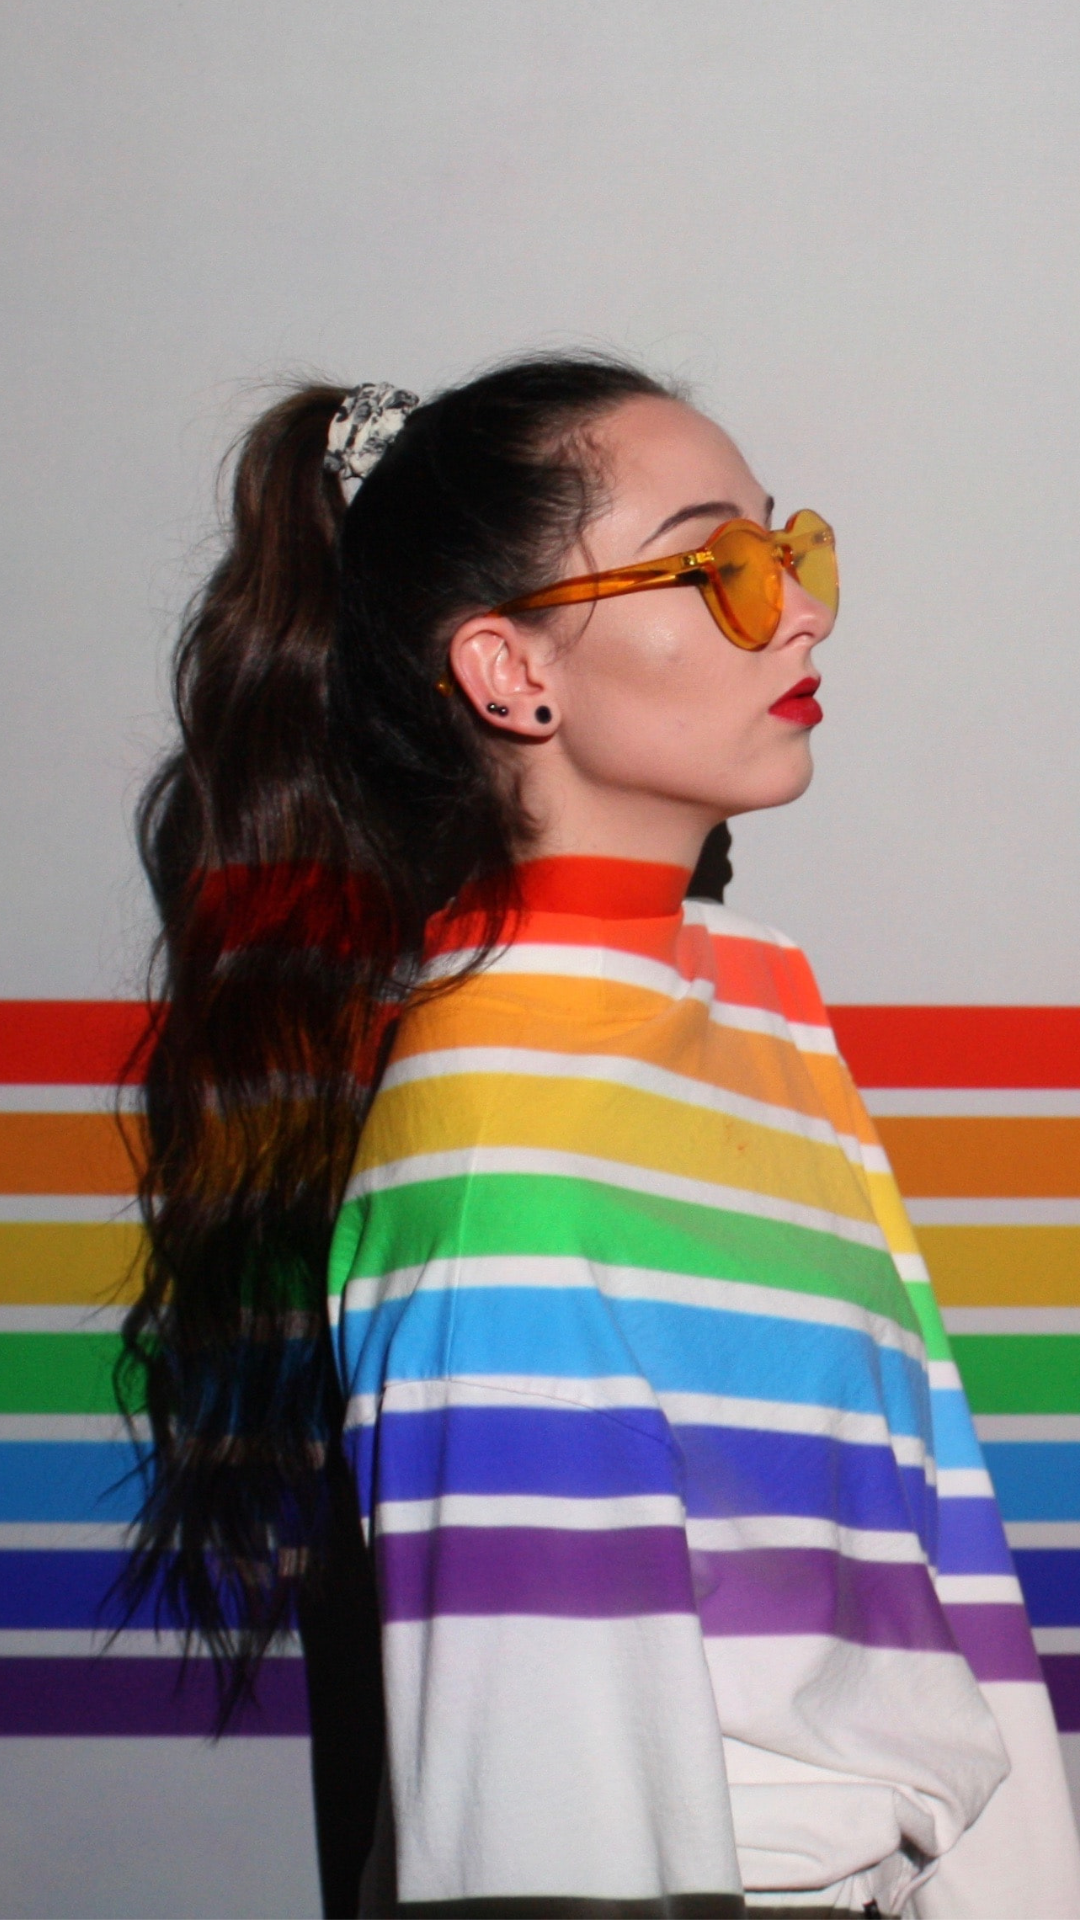 Image of a woman wearing glasses, standing in front of a wall, with the pride colors painted horizontally on the wall and the paint going over the woman's shirt.